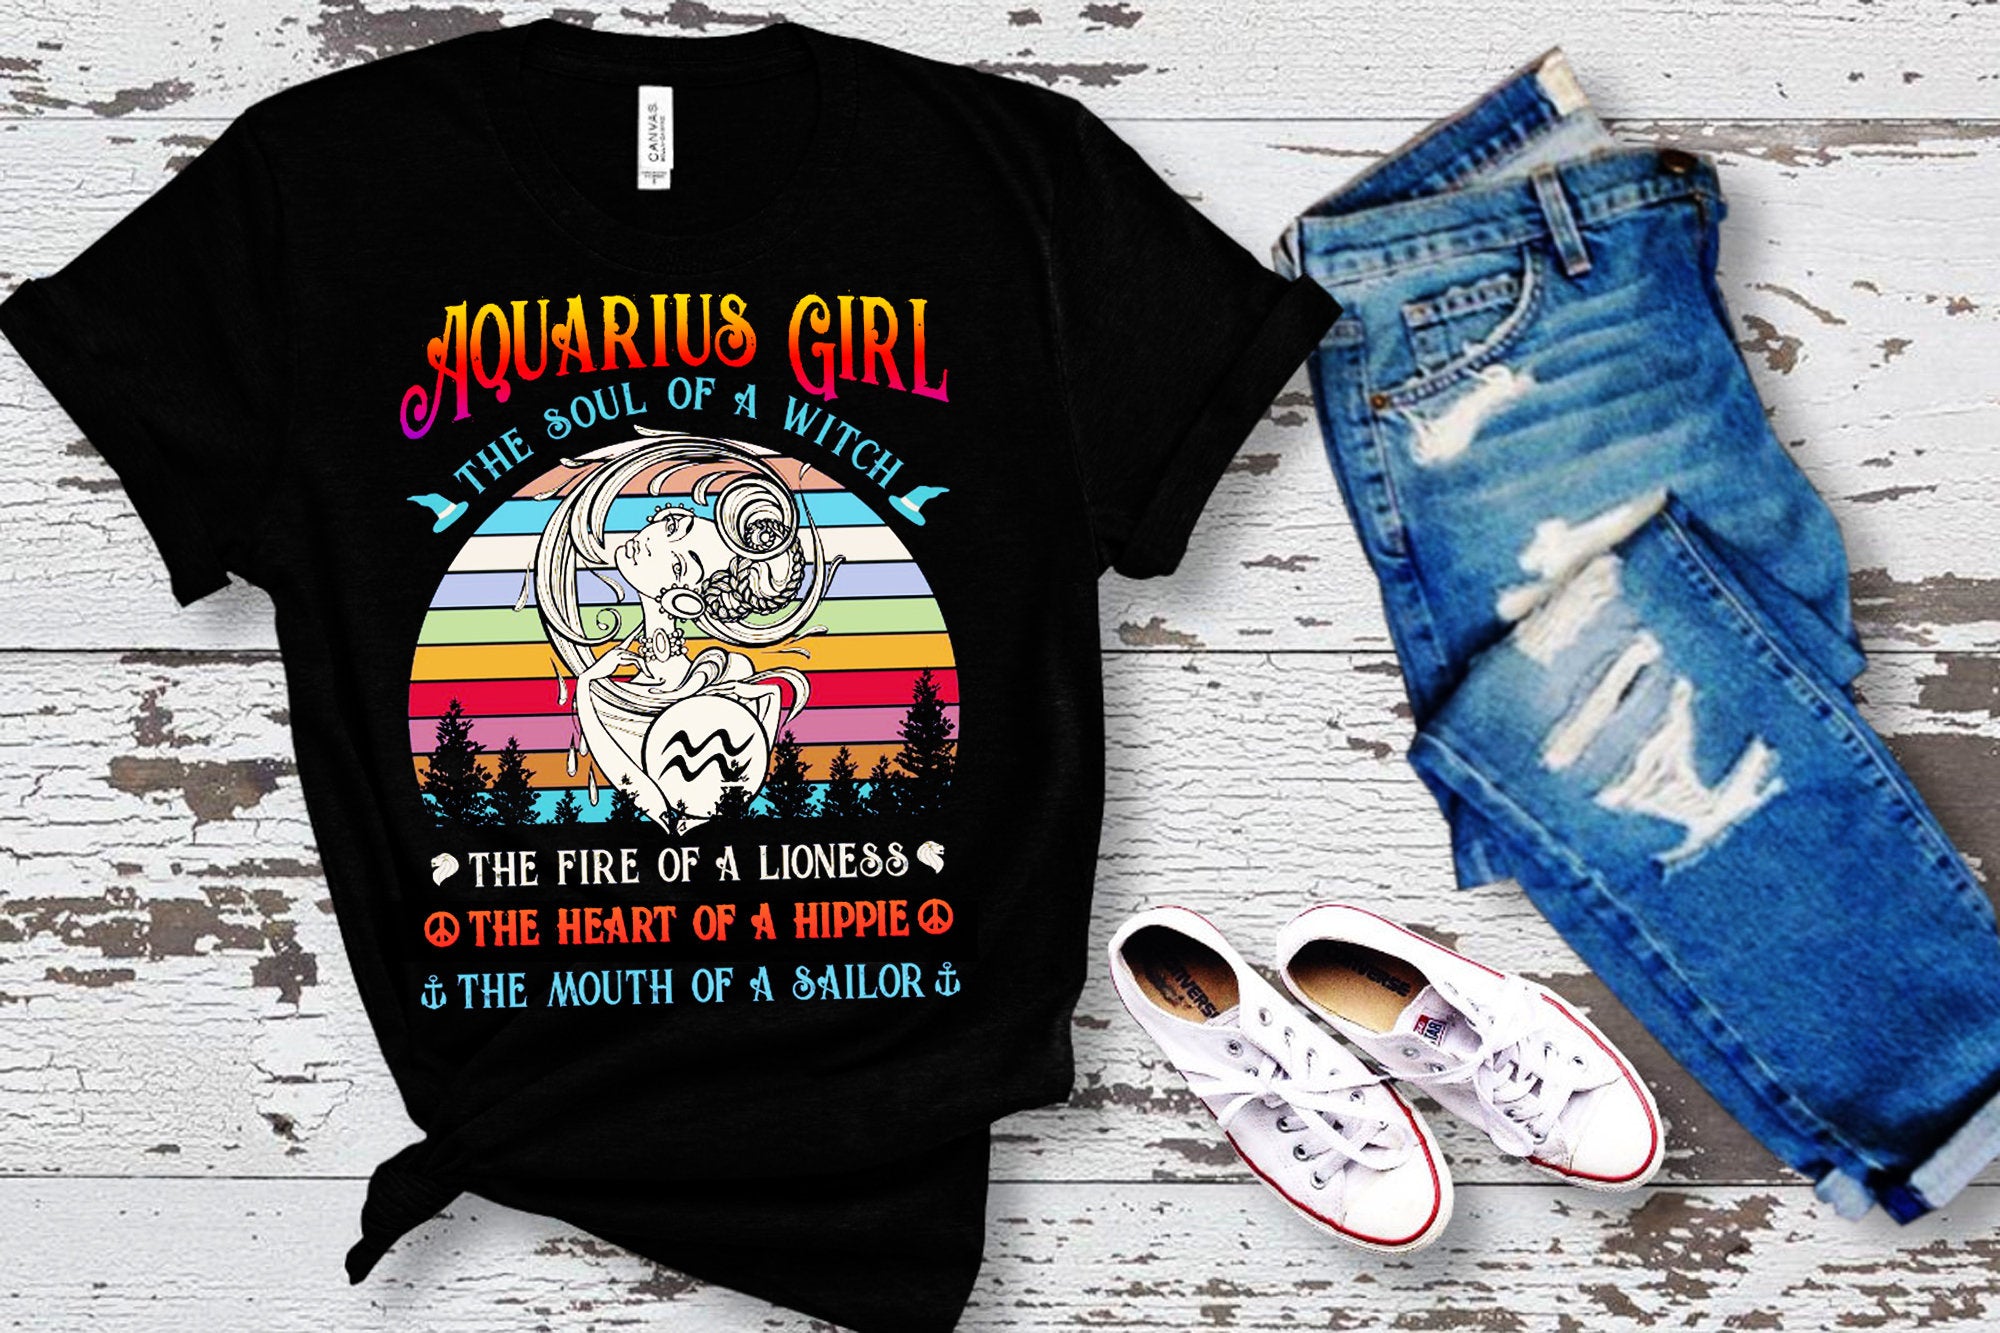 Aquarius Girl The Soul Of A Witch Awesome T-Shirts, the fire of lioness, the heart of hippie, mouth of a sailor - plusminusco.com